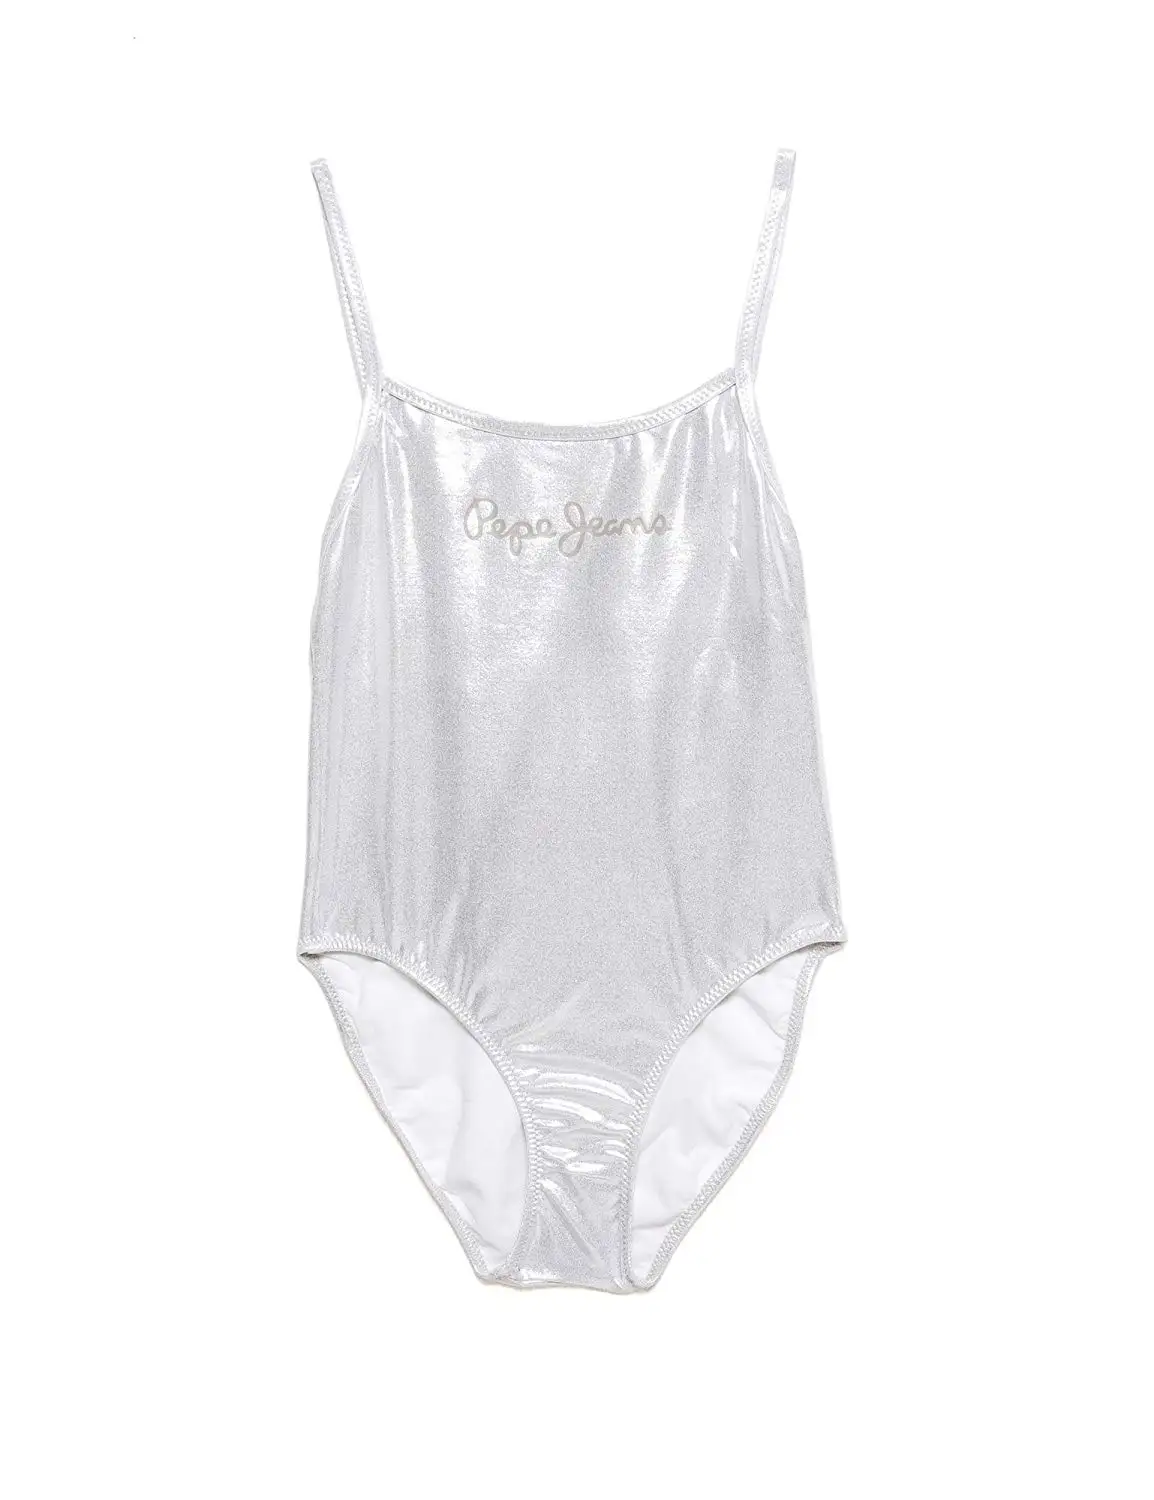 Cheap Swimsuit Silver, find Swimsuit Silver deals on line at Alibaba.com